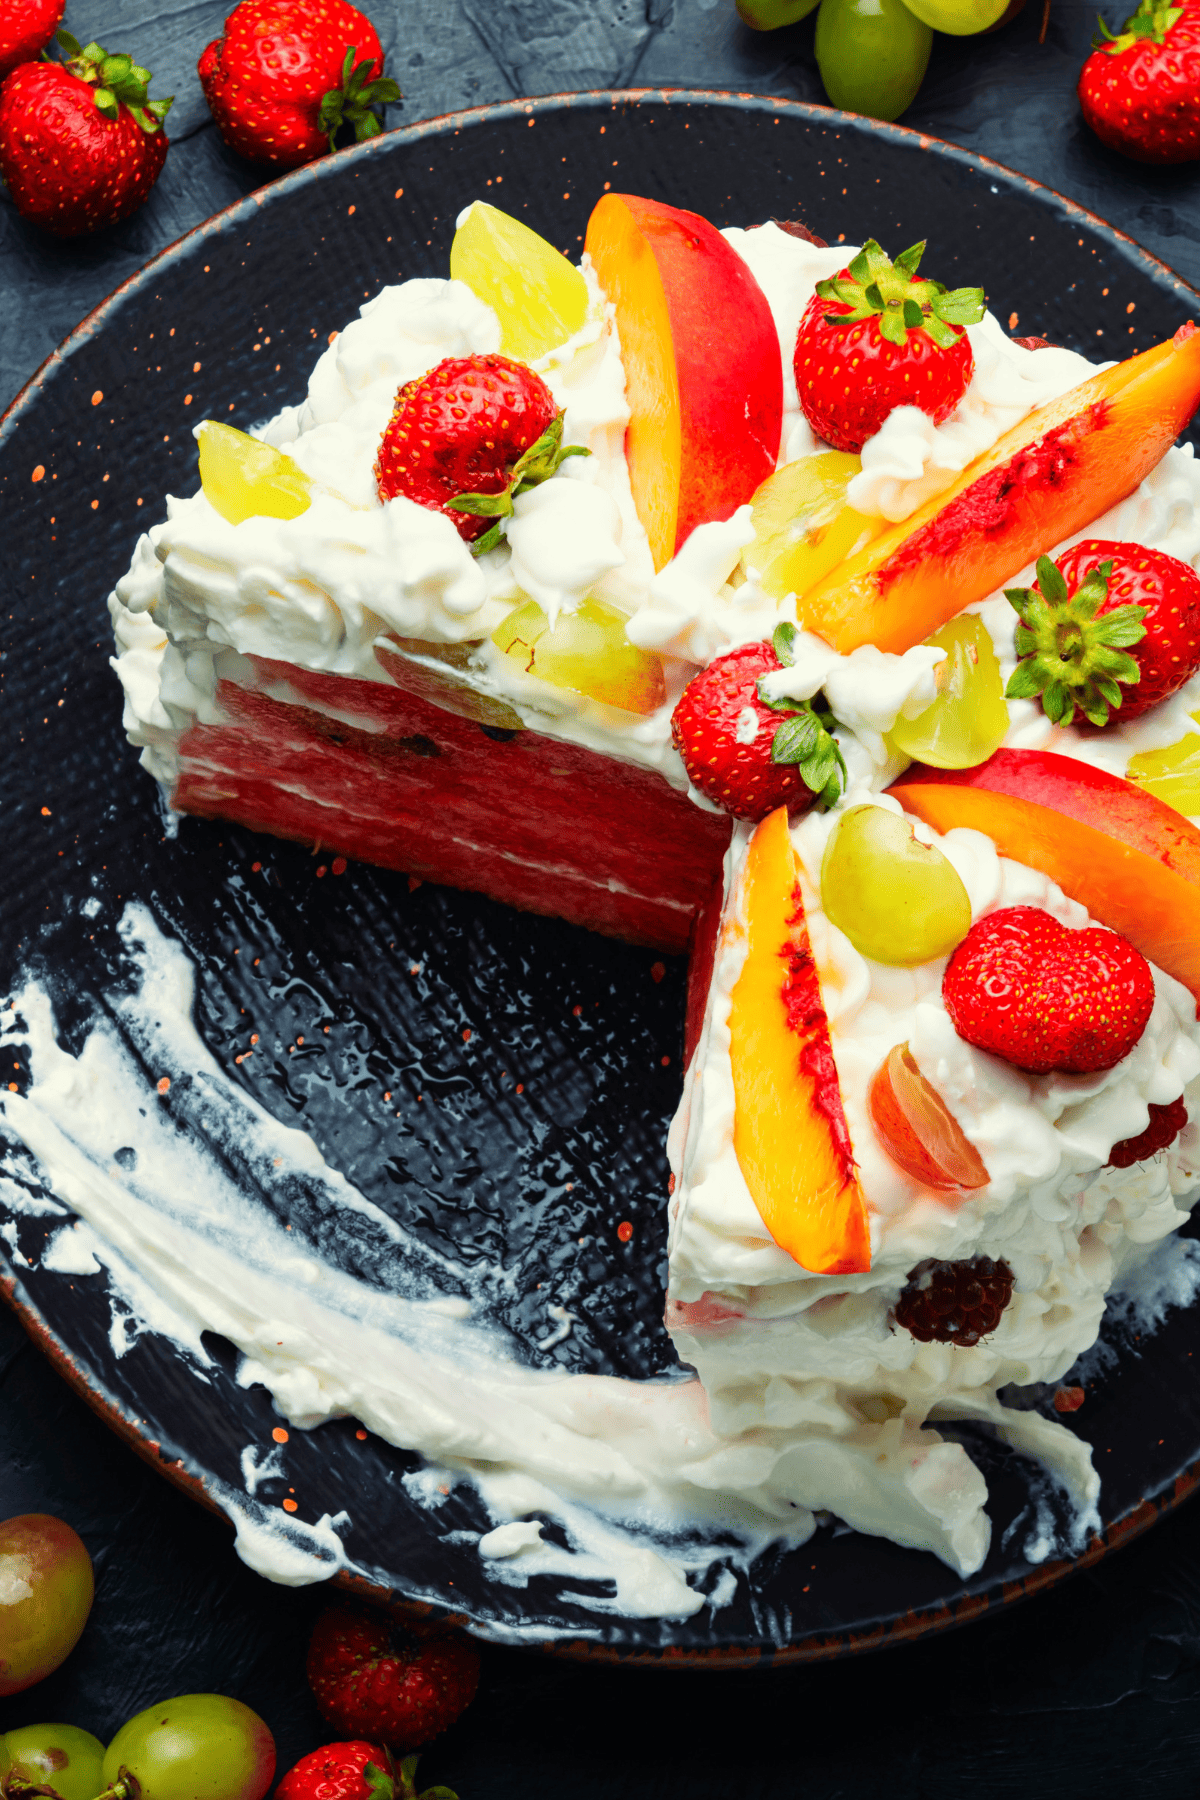 layered melon cake with frosting and fruits on top.